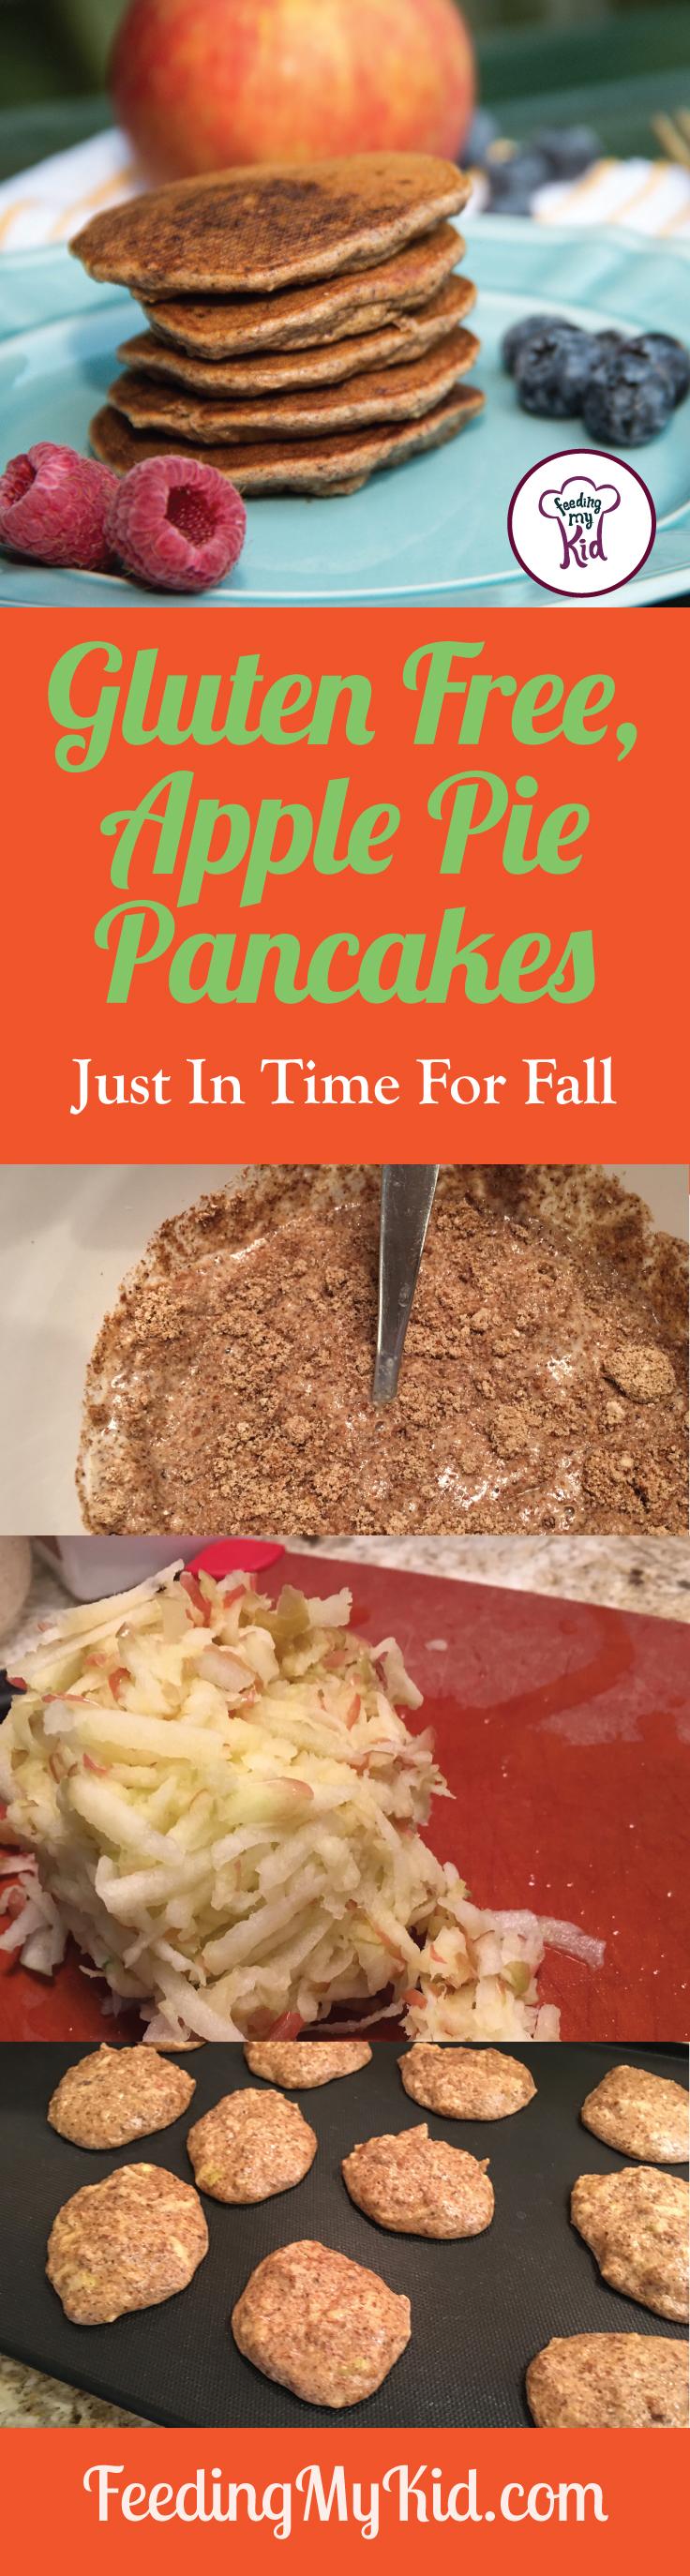 These apple pie pancakes are perfect for fall! These gluten-free pancakes have nutritious almond flour, flaxseed, and fresh apples.